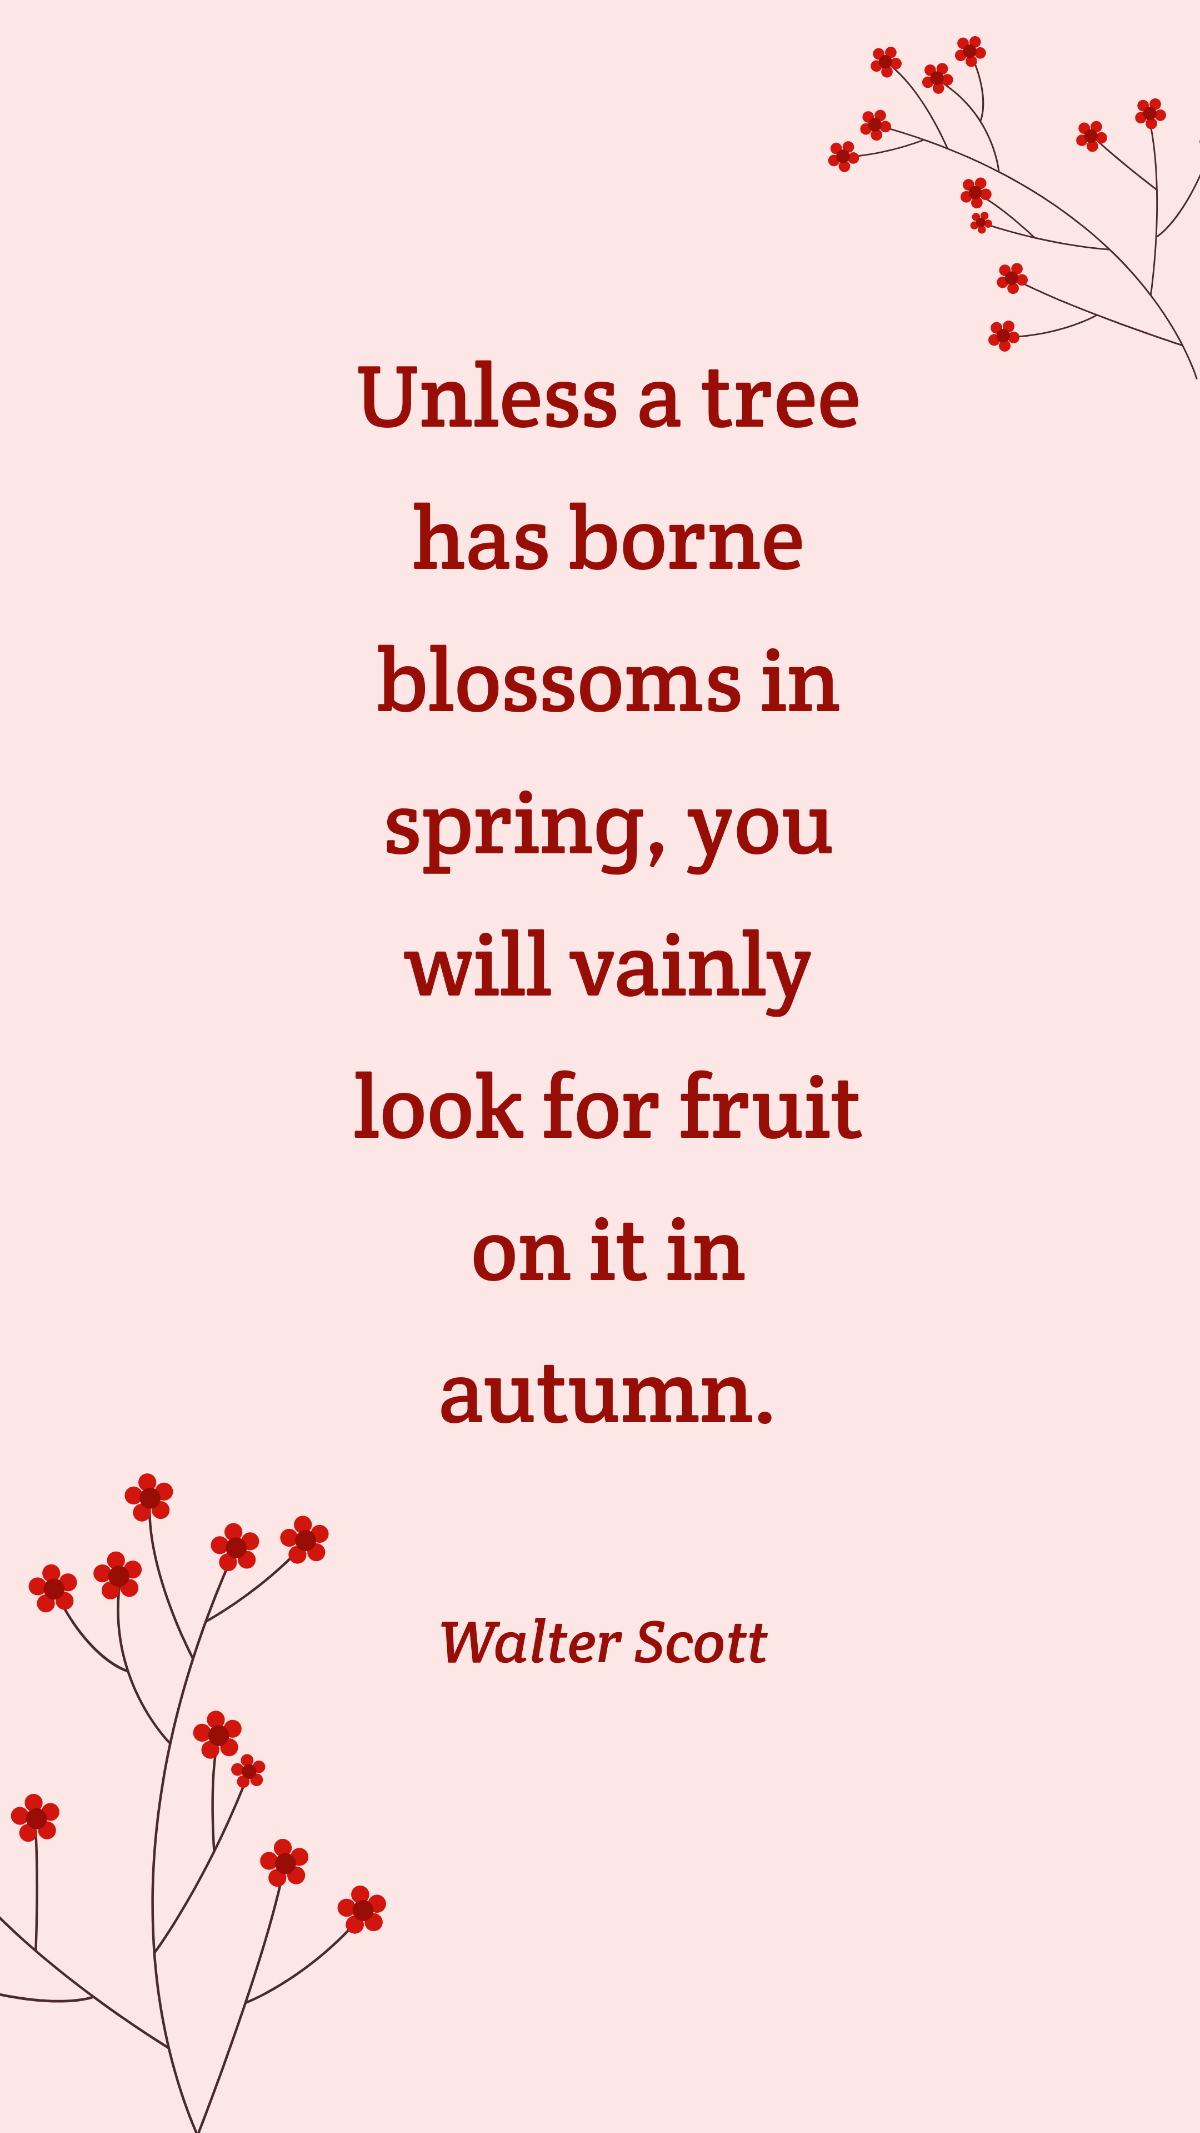 Walter Scott - Unless a tree has borne blossoms in spring, you will vainly look for fruit on it in autumn. Template